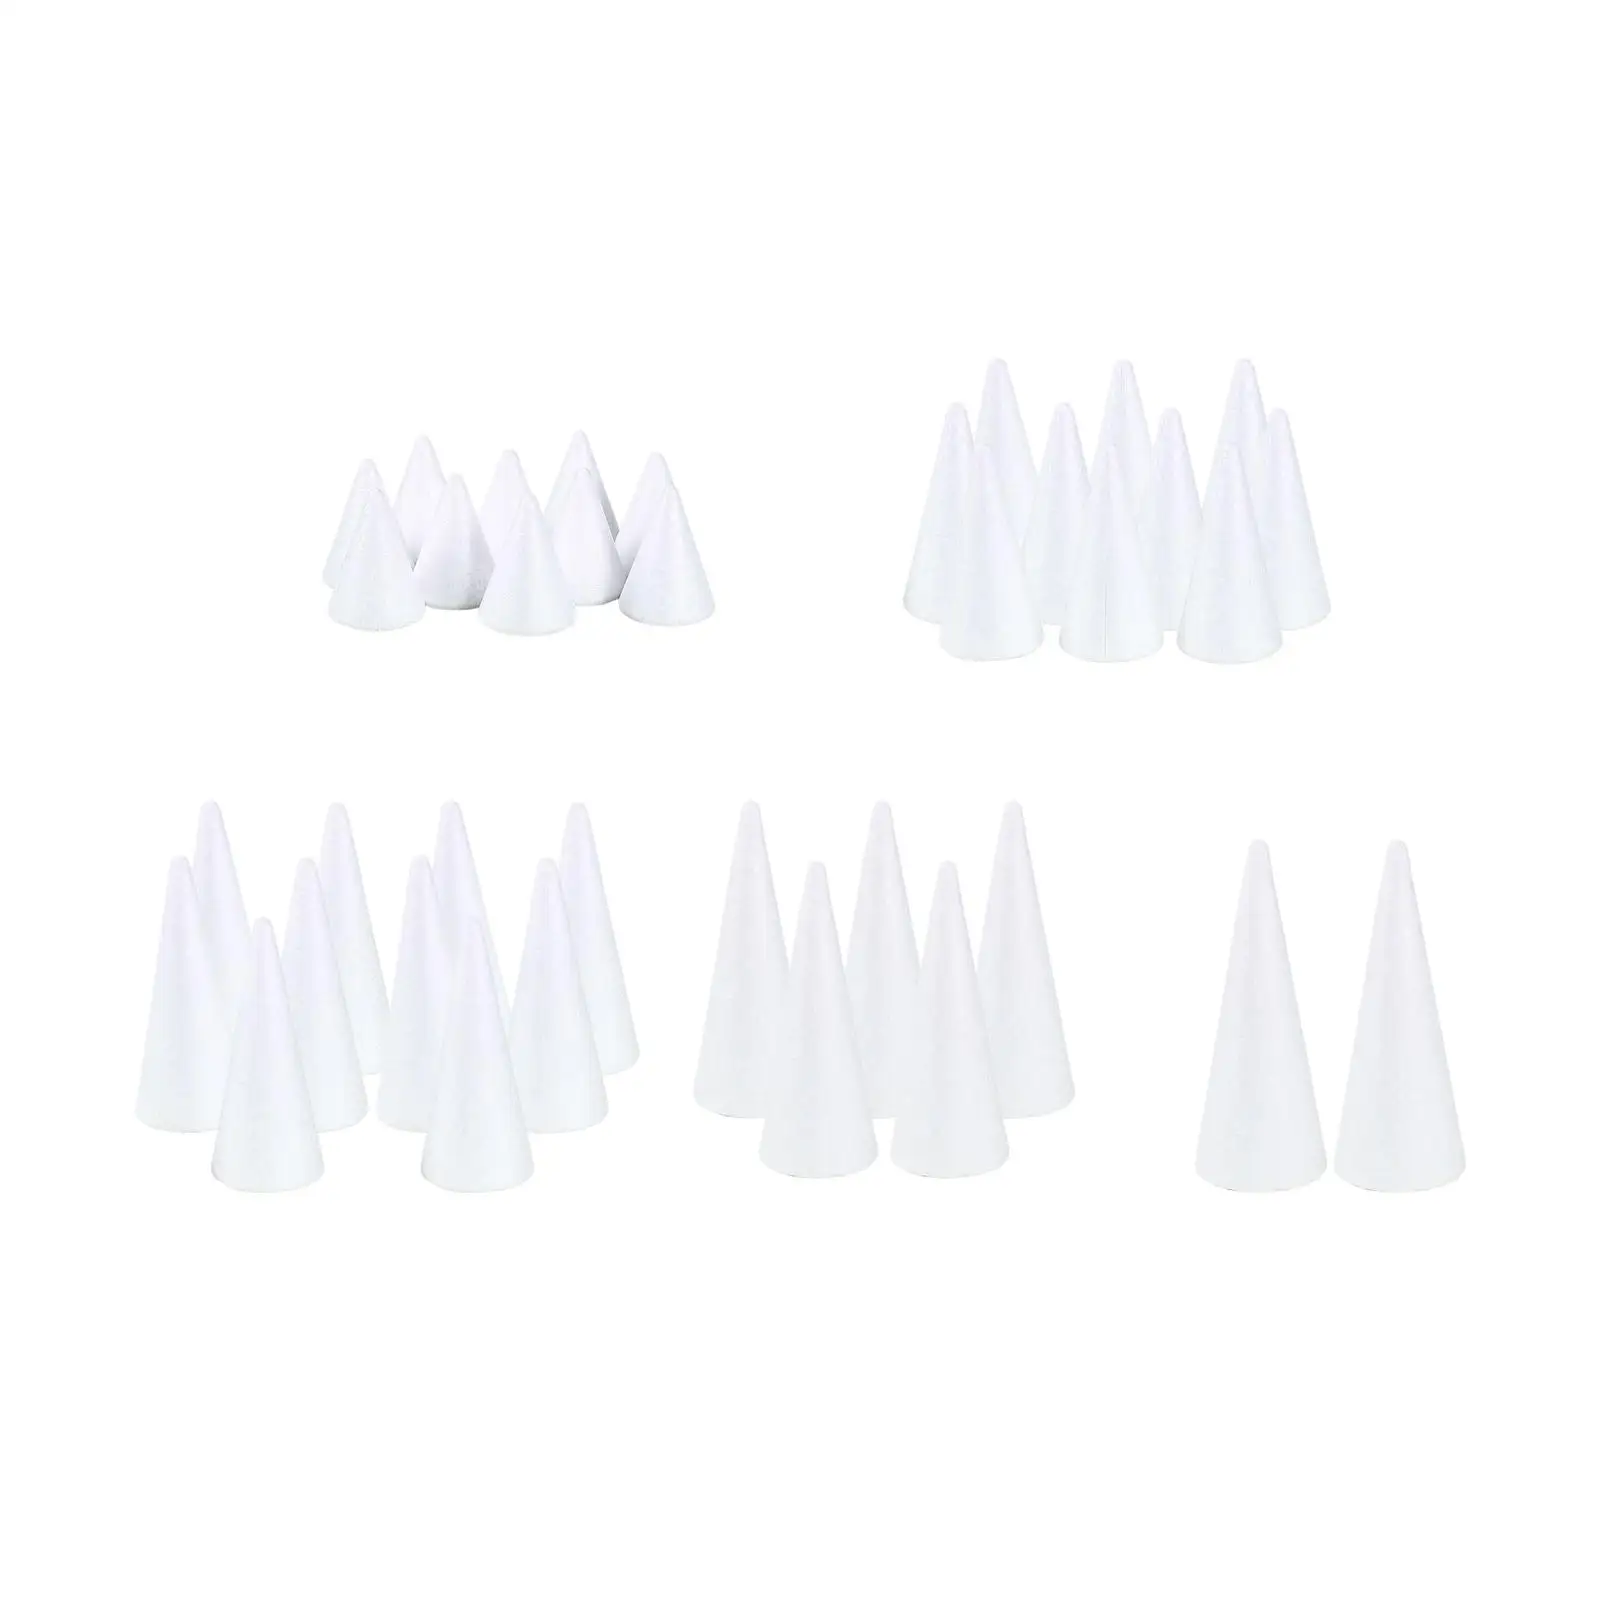 

Foam Cone Craft DIY Craft Material Children Educational Toy Party Supply Accessories Widely Usage Decoration